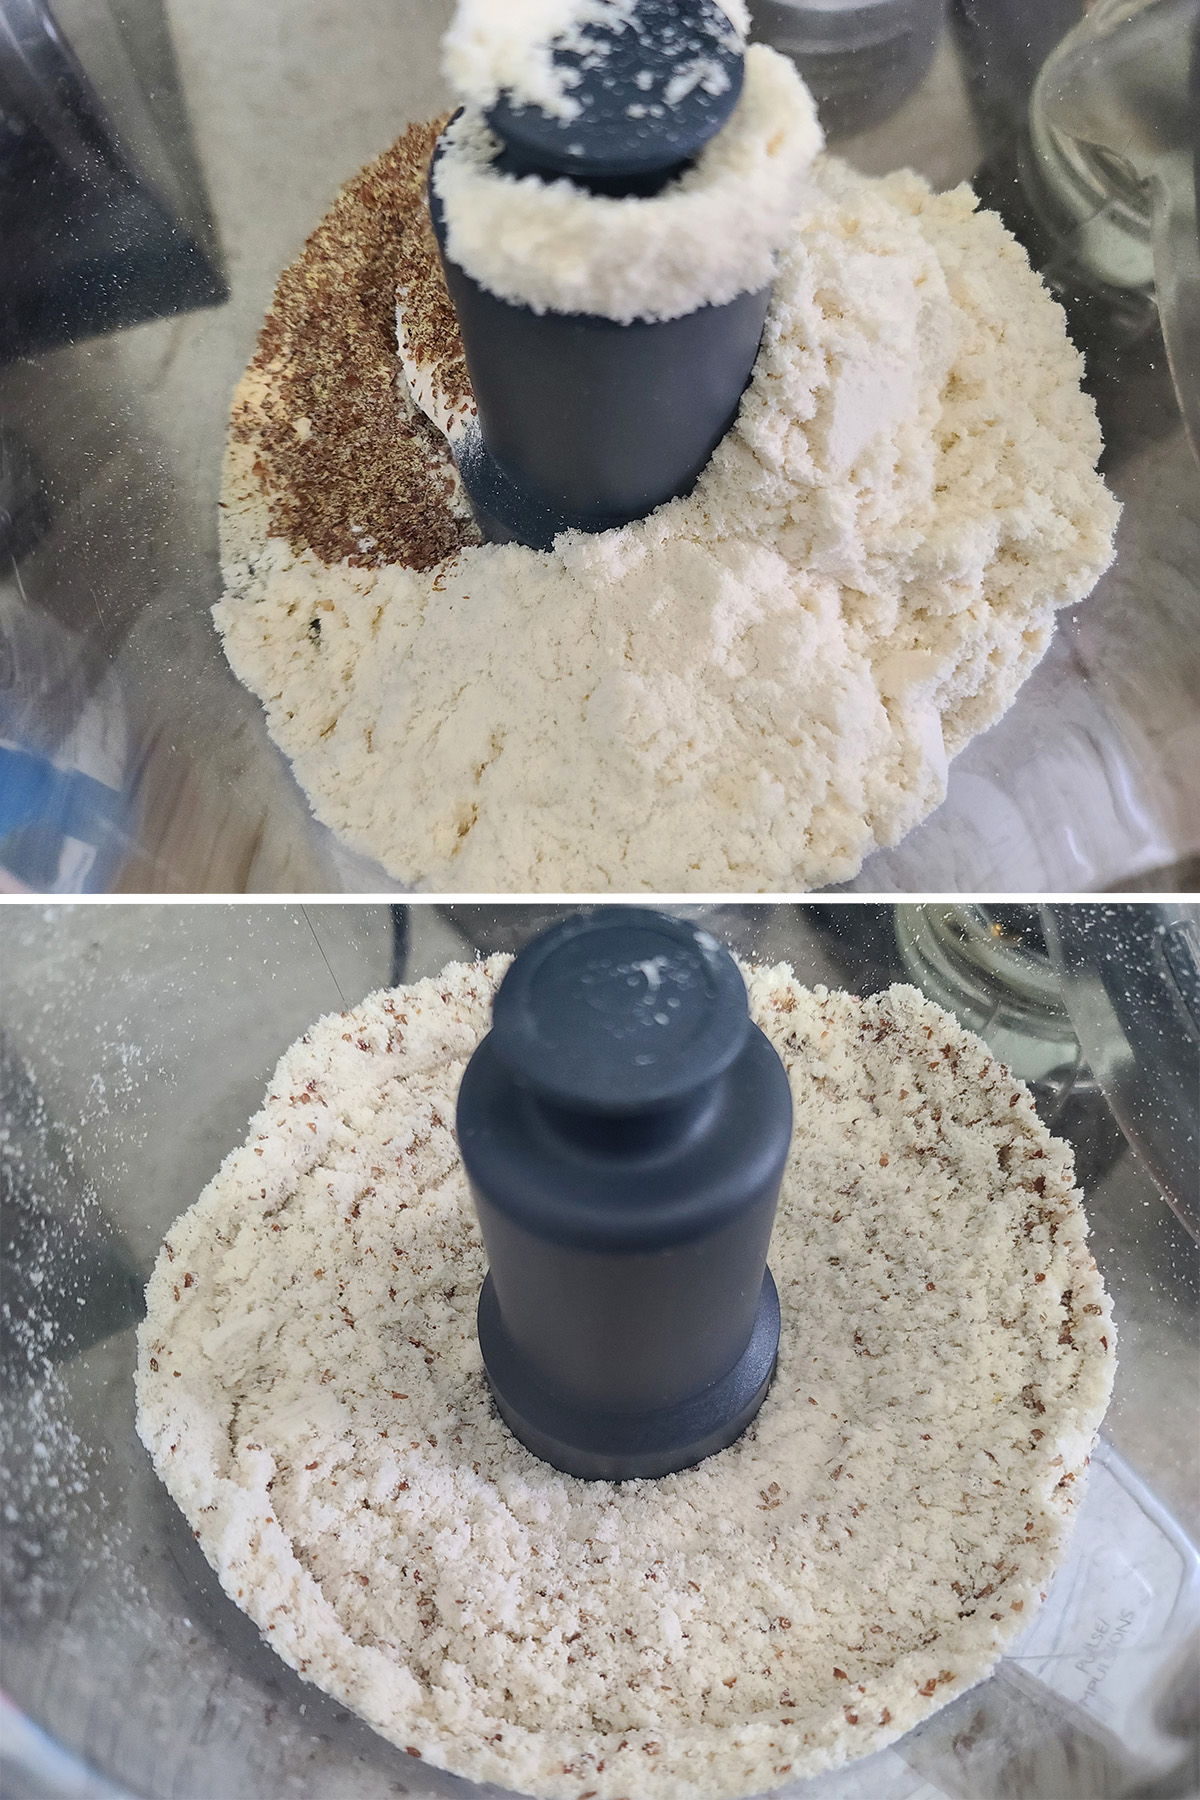 A 2 part image showing the dry ingredients in a food processor